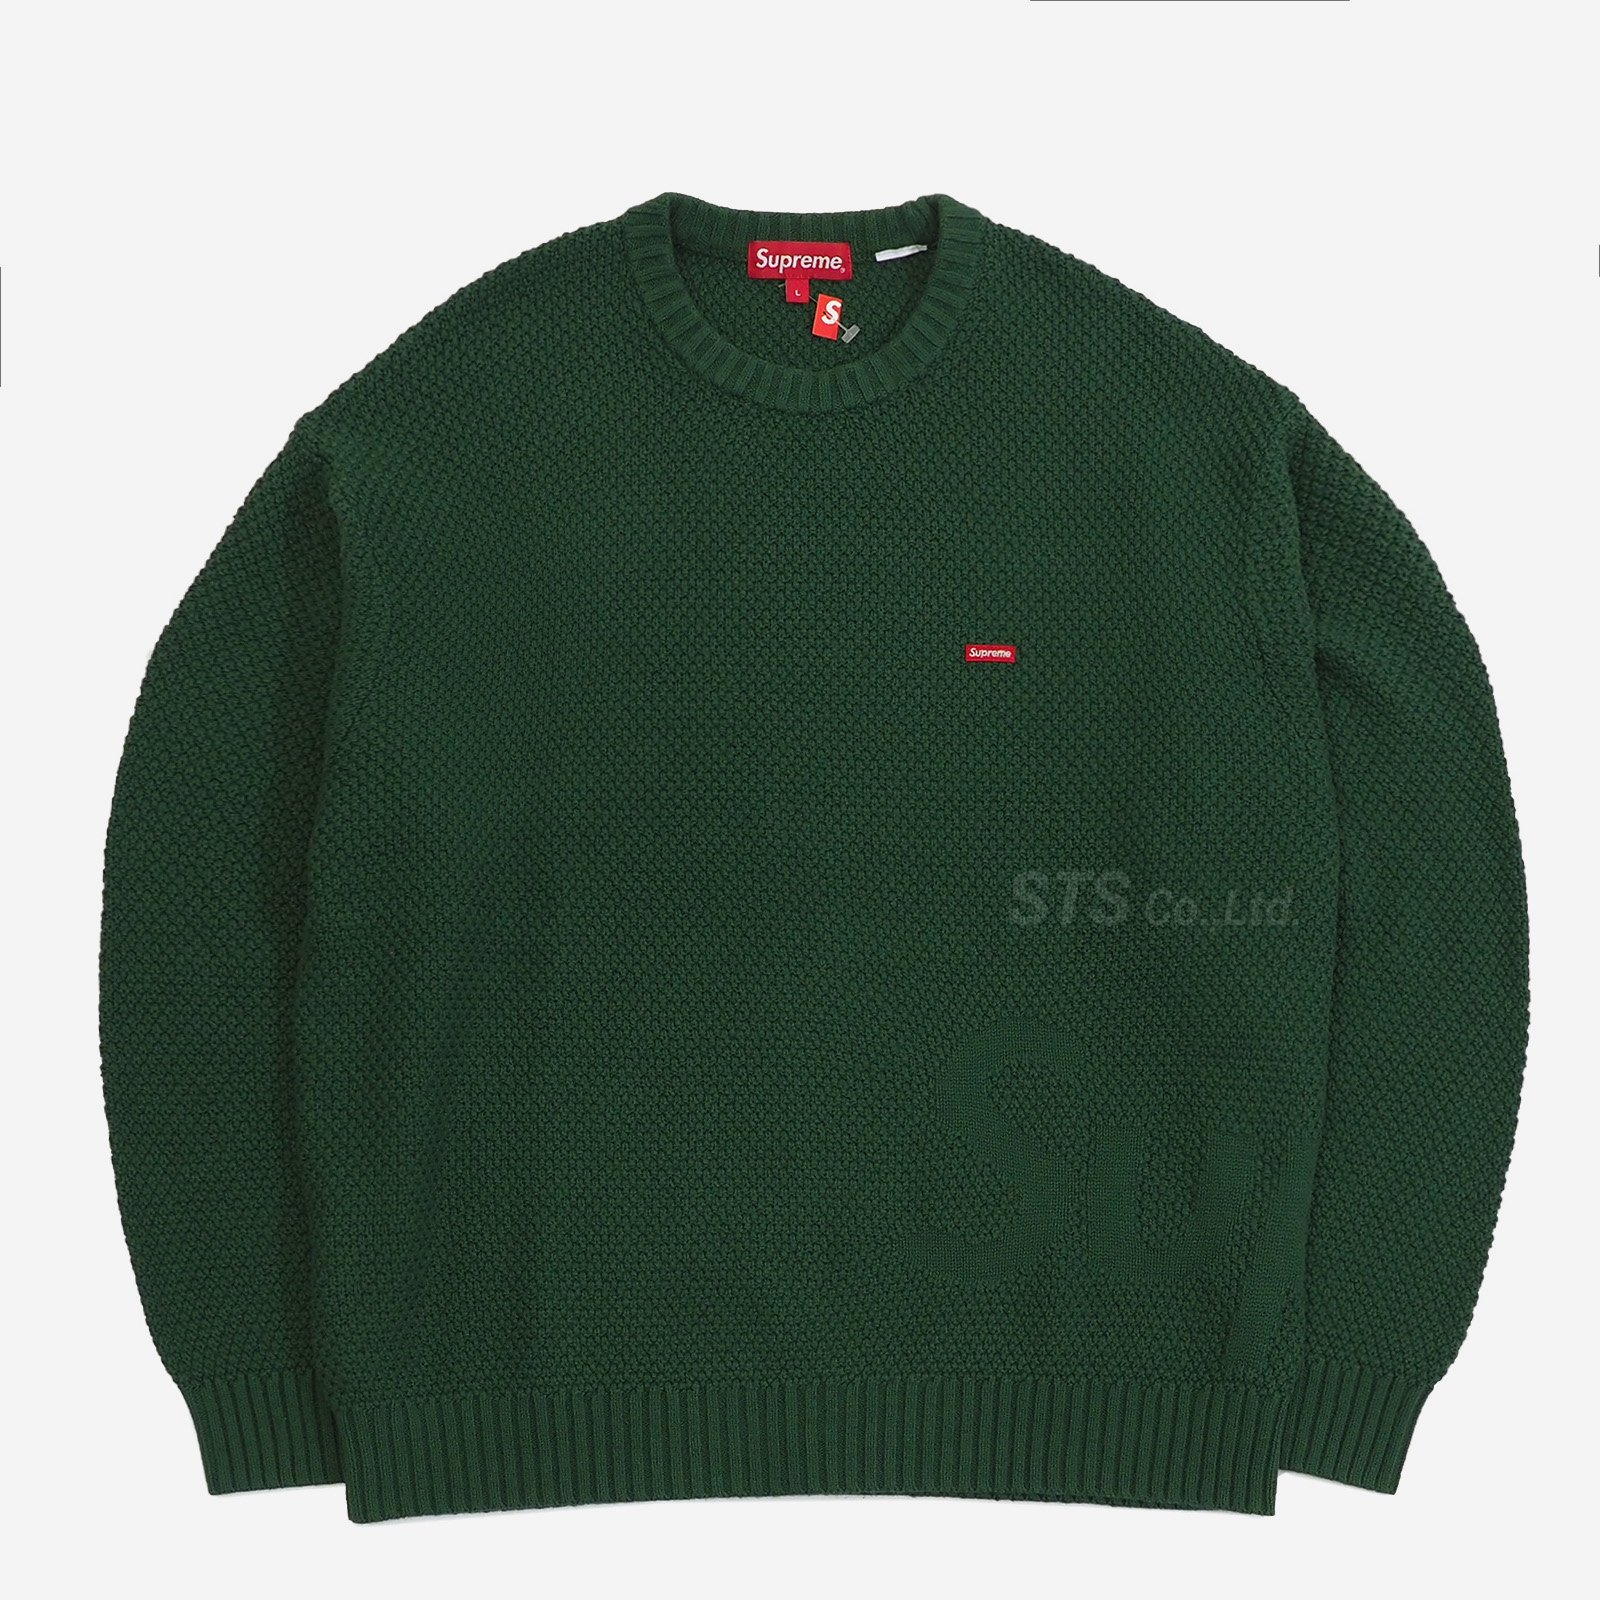 Supreme - Textured Small Box Sweater - ParkSIDER